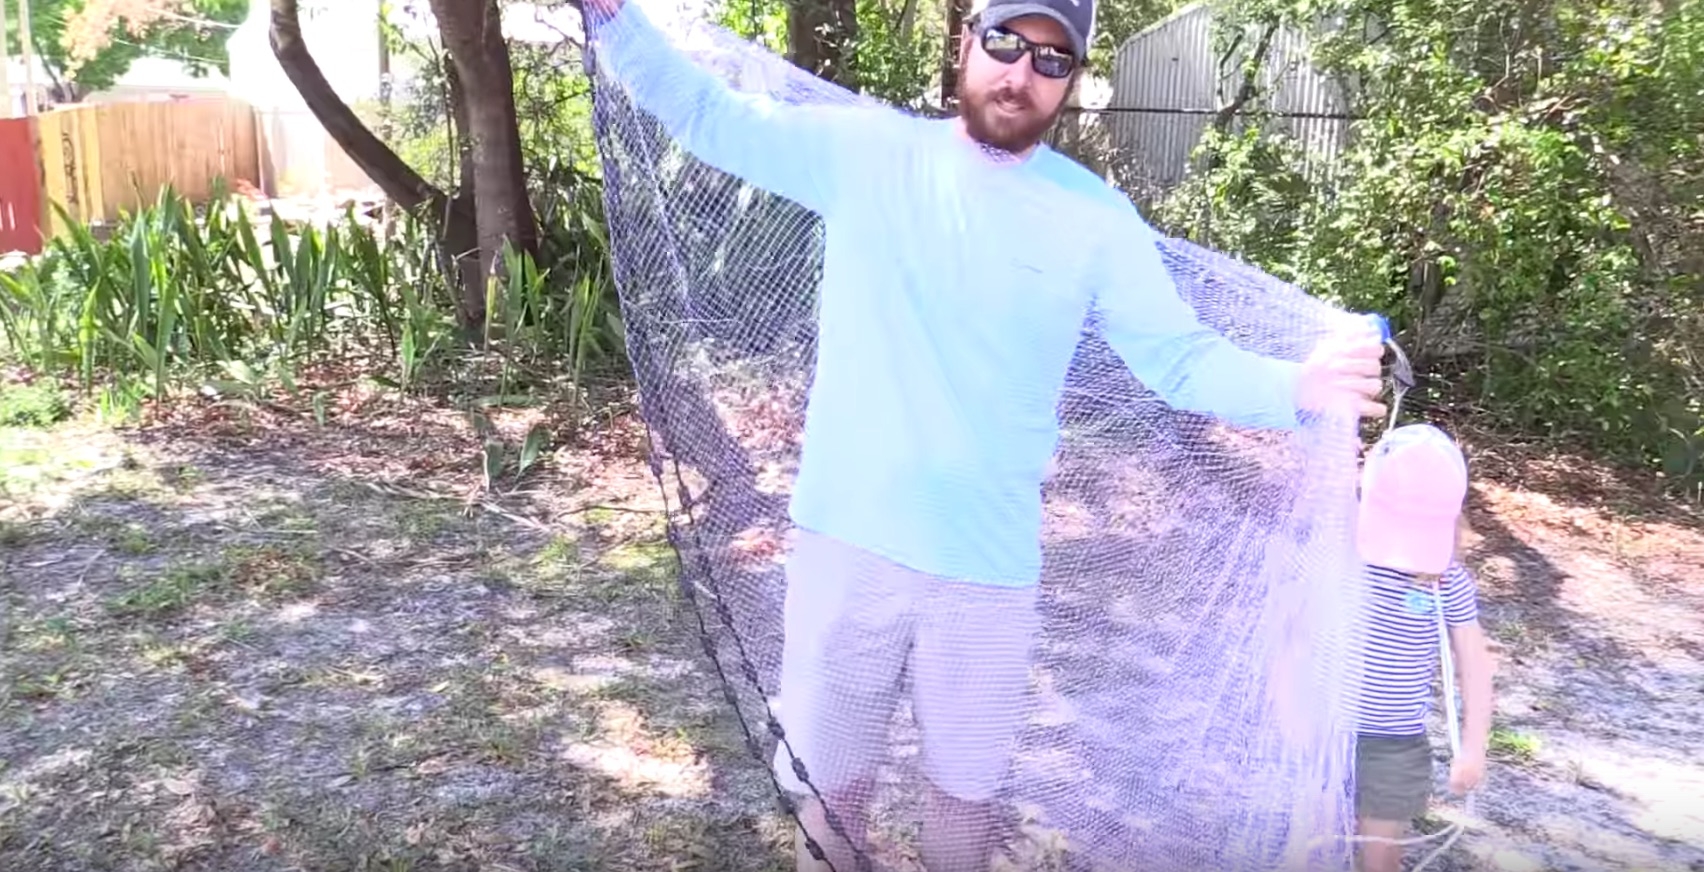 How To Throw A 4-Foot Cast Net Without Using Your Mouth [VIDEO]